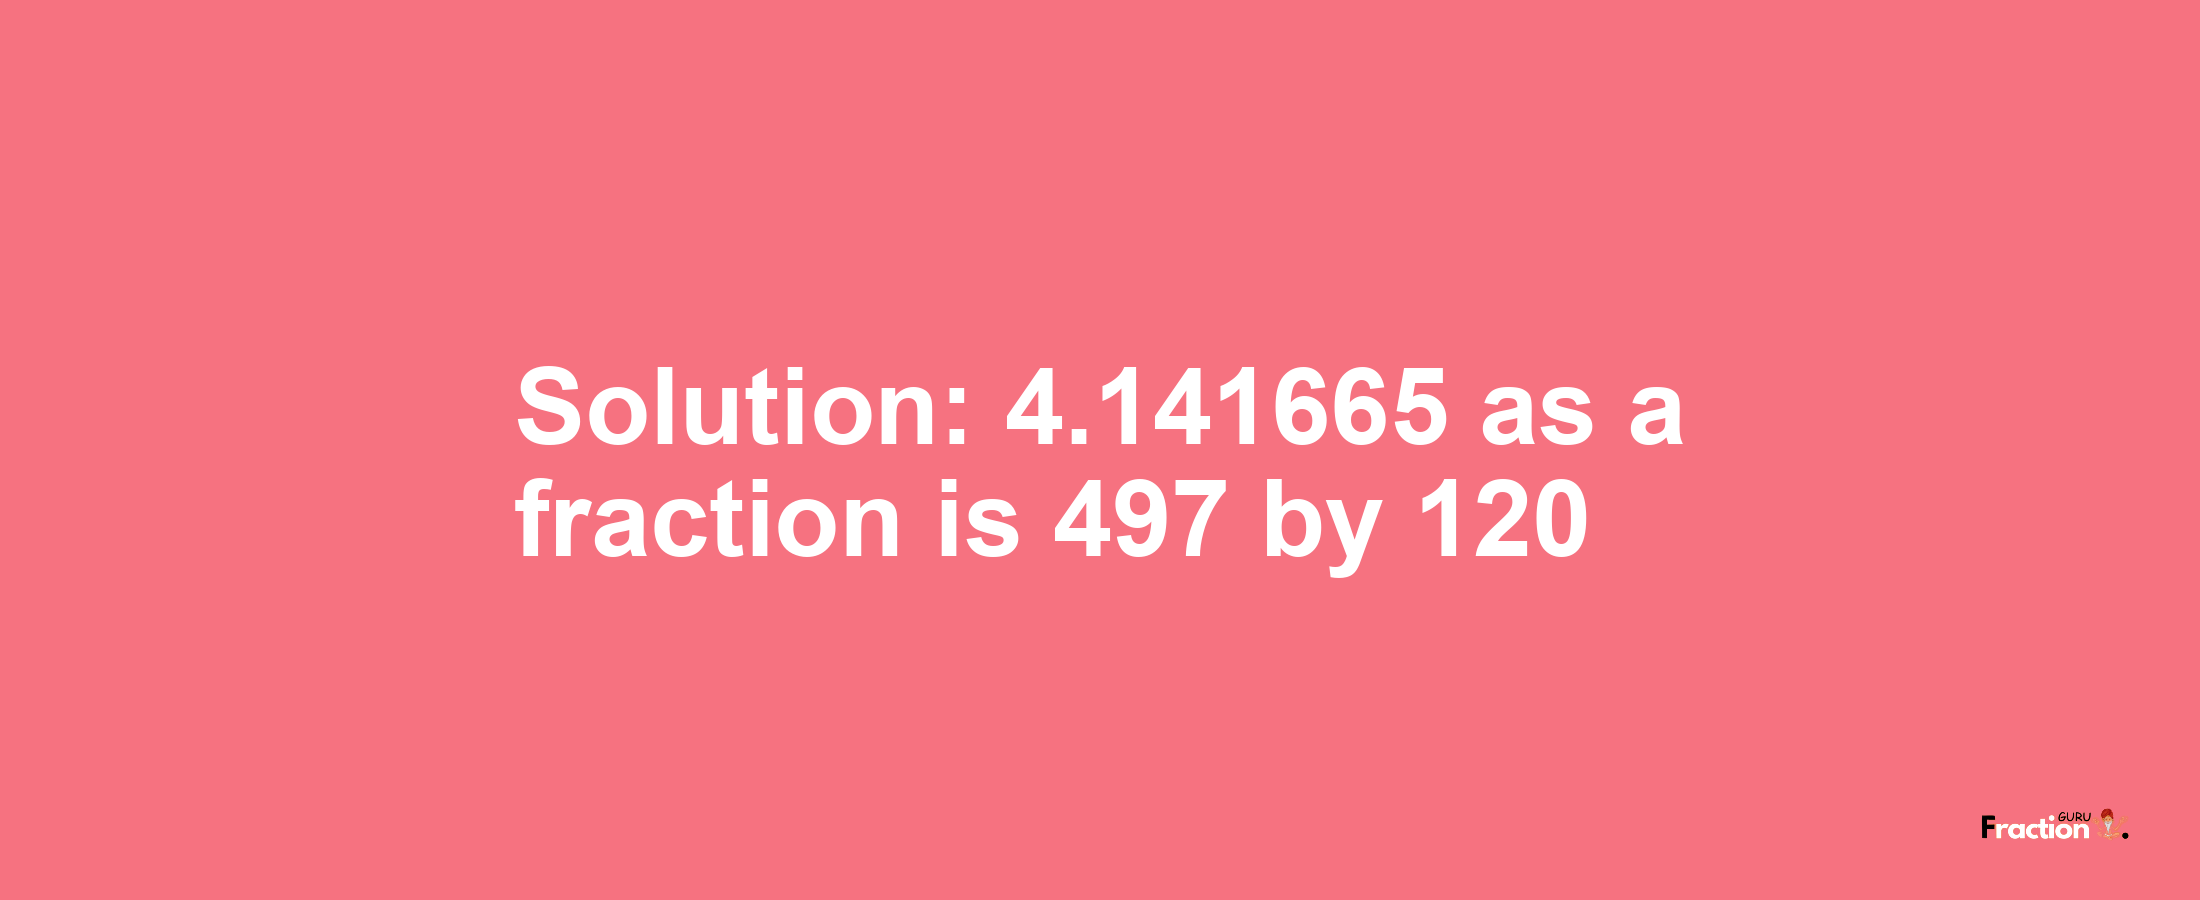 Solution:4.141665 as a fraction is 497/120